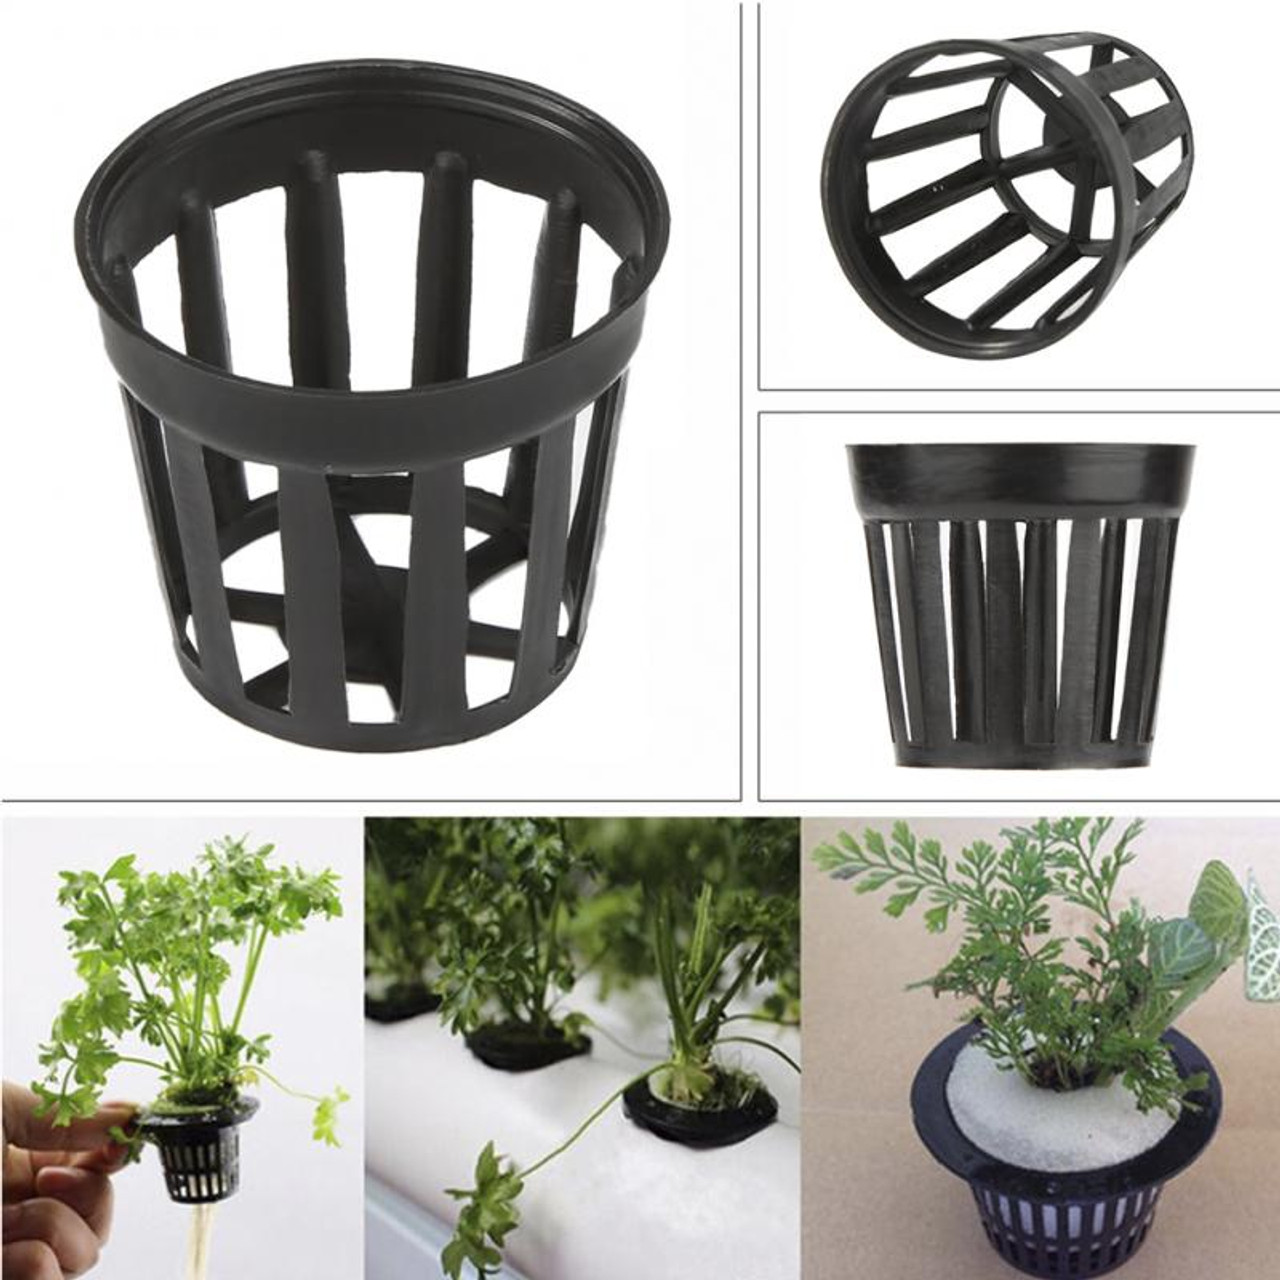 10 x Hydroponic Pots Buy in bulk and save! available in 2 sizes 